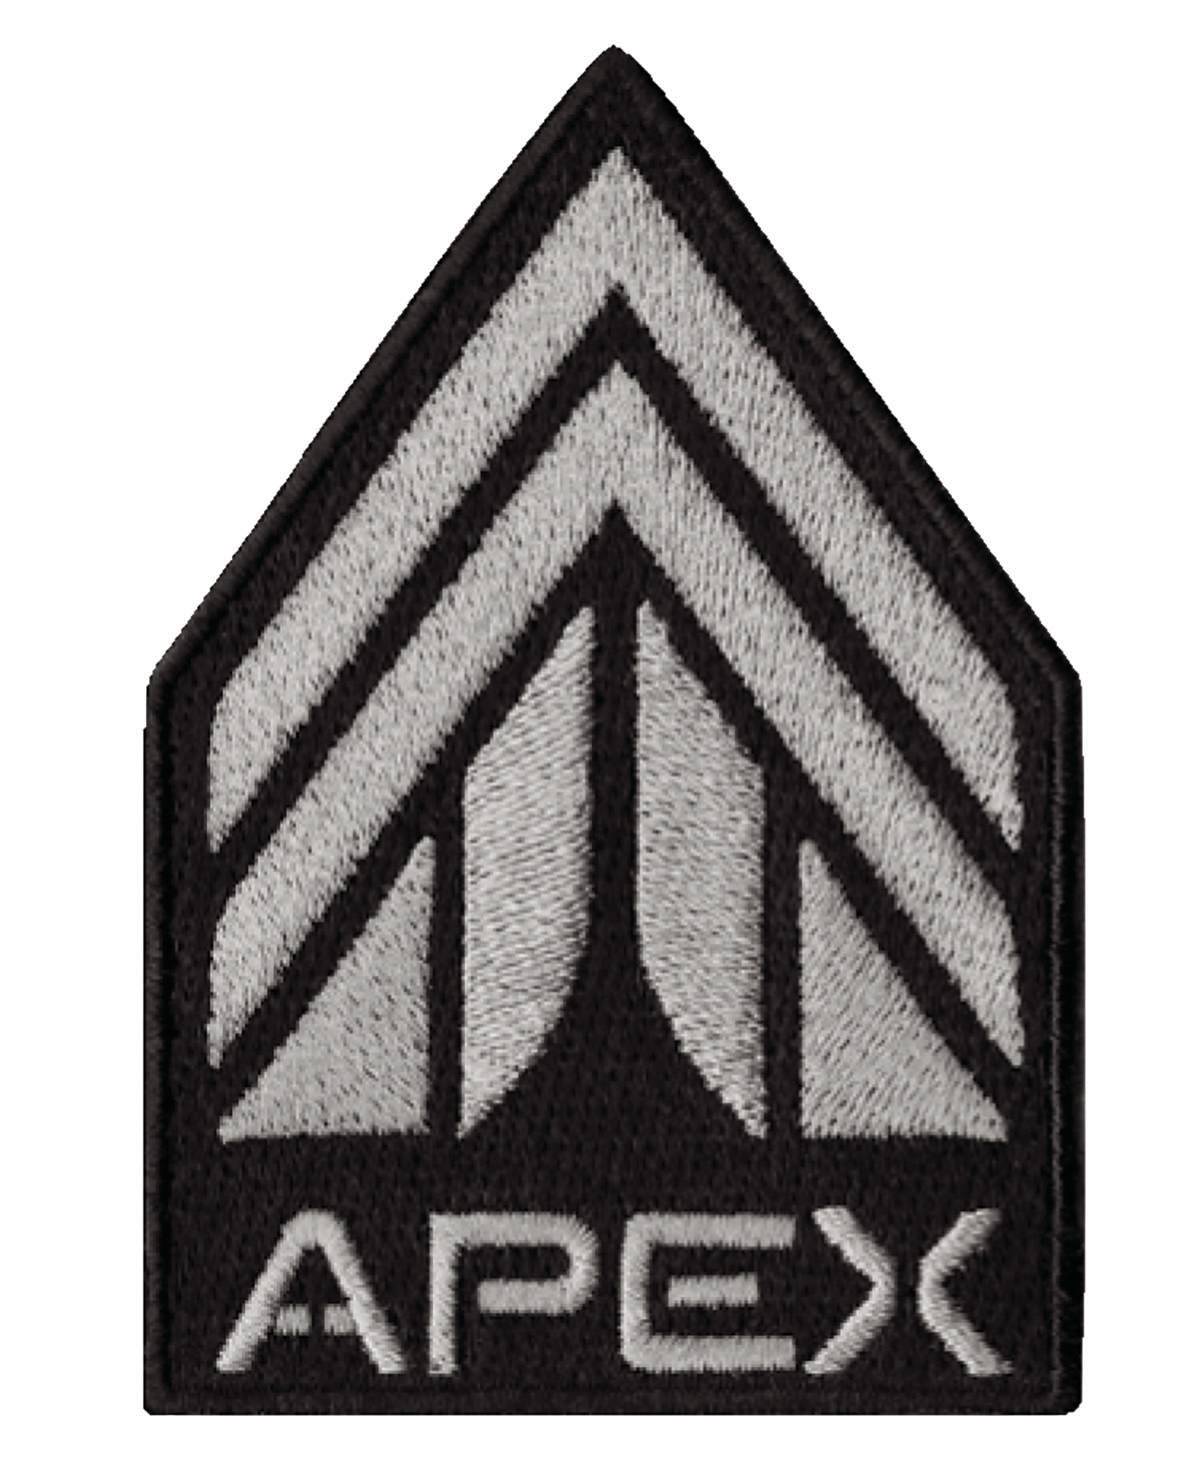 Mass Effect Andromeda Apex Patch